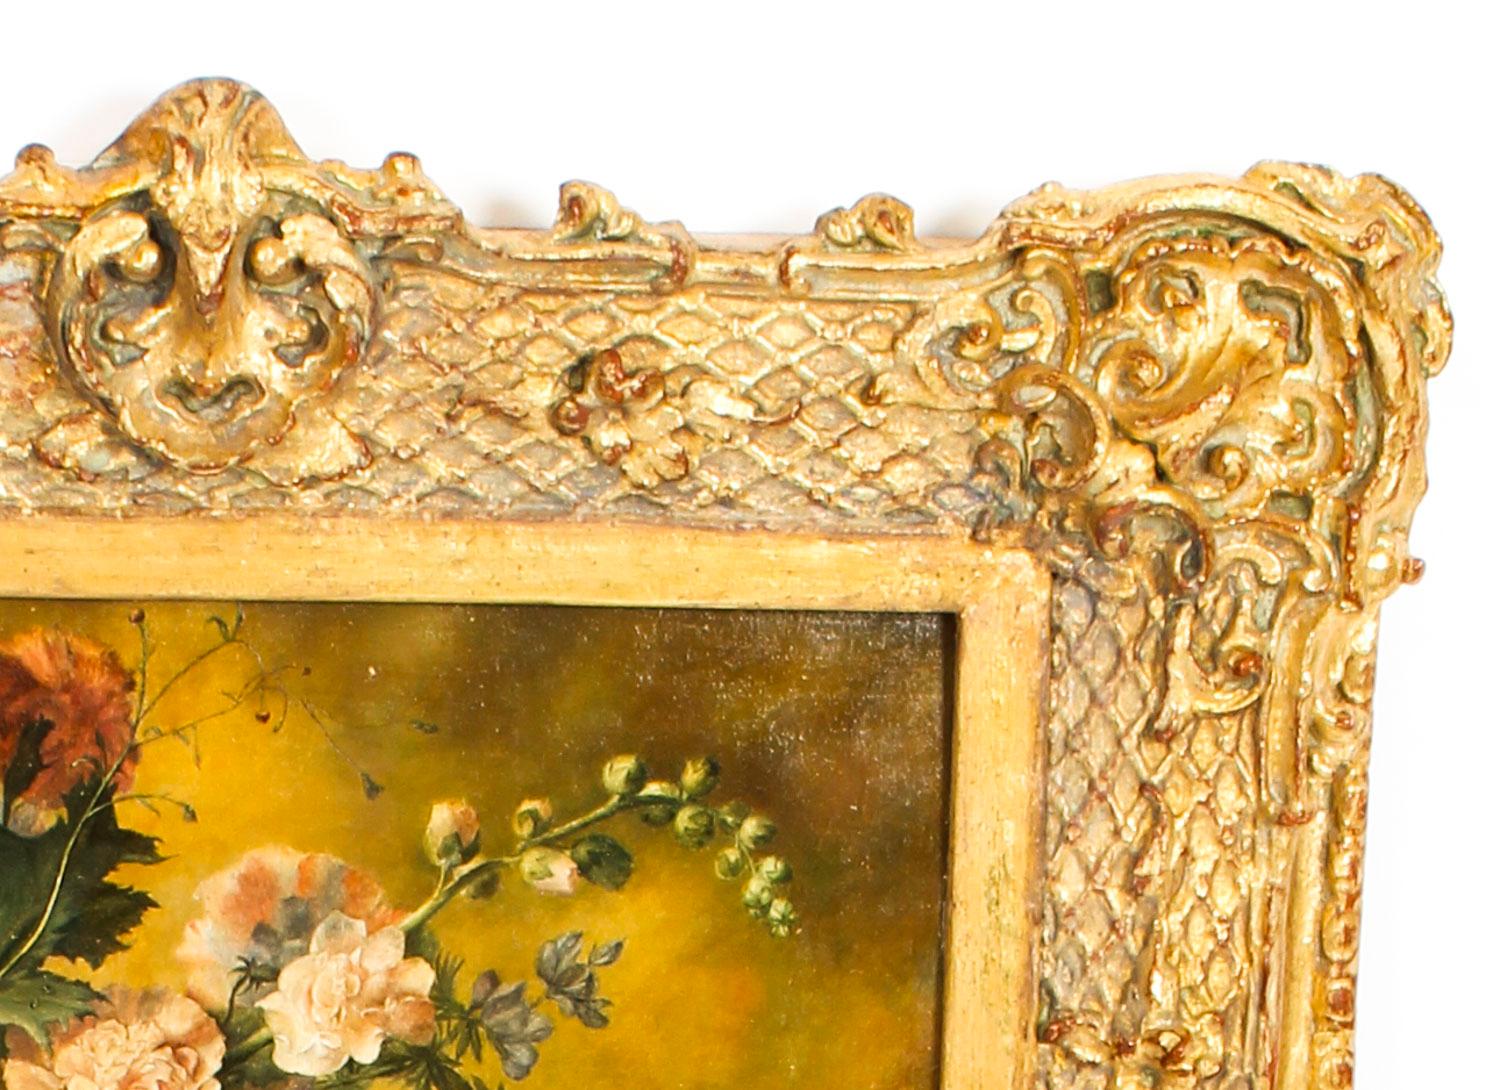 A beautiful Antique Italian parcel-gilt Trumeau mirror, circa 1860 in date.

The mirror features a top panel with a carved acanthus carved crest and diamond running pattern, framing a beautiful painting depicting a still life of bouquet summer